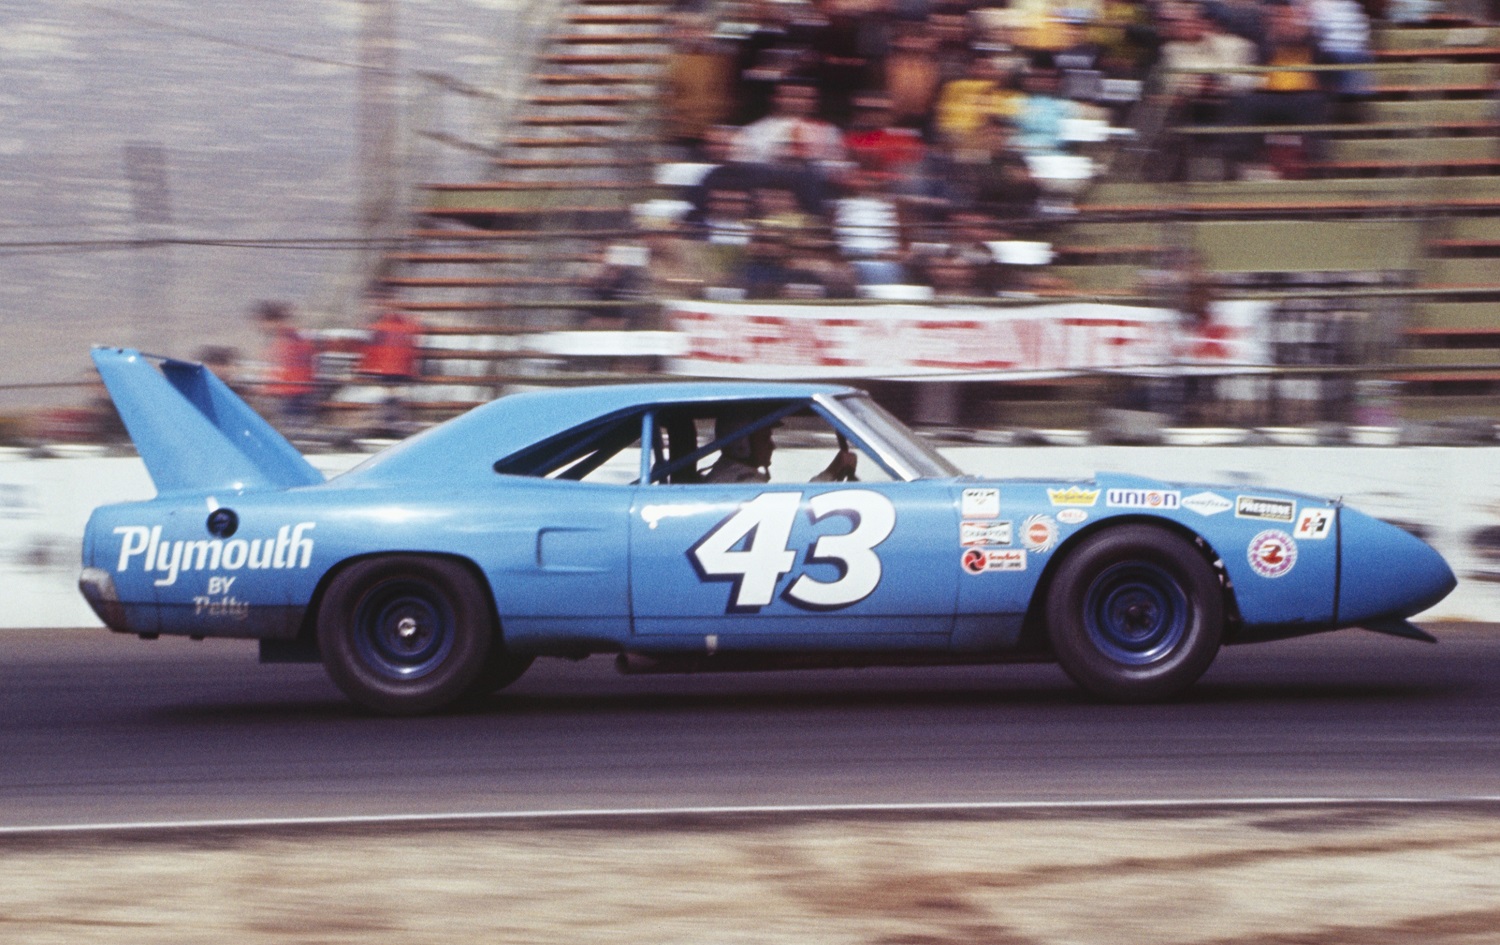 Richard Petty driving his Plymouth Superbird in 1970.